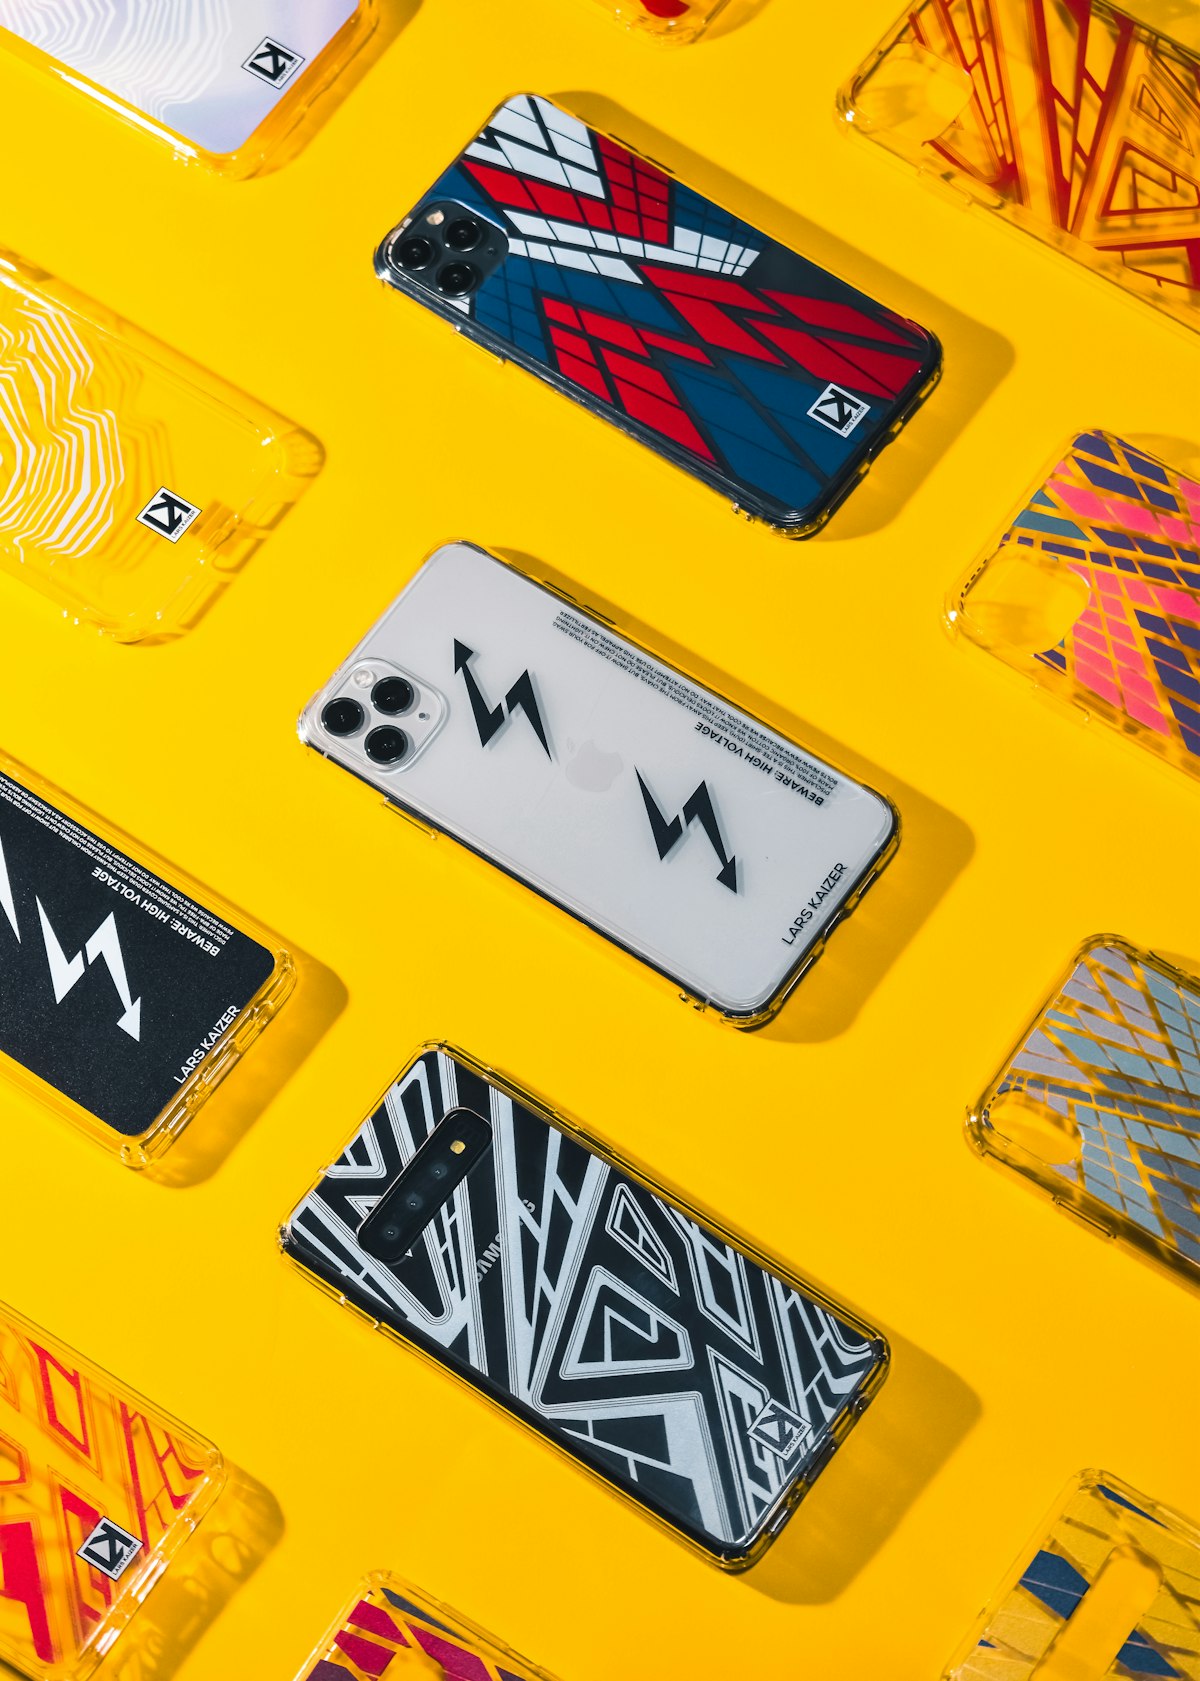 The Case for Phone Cases